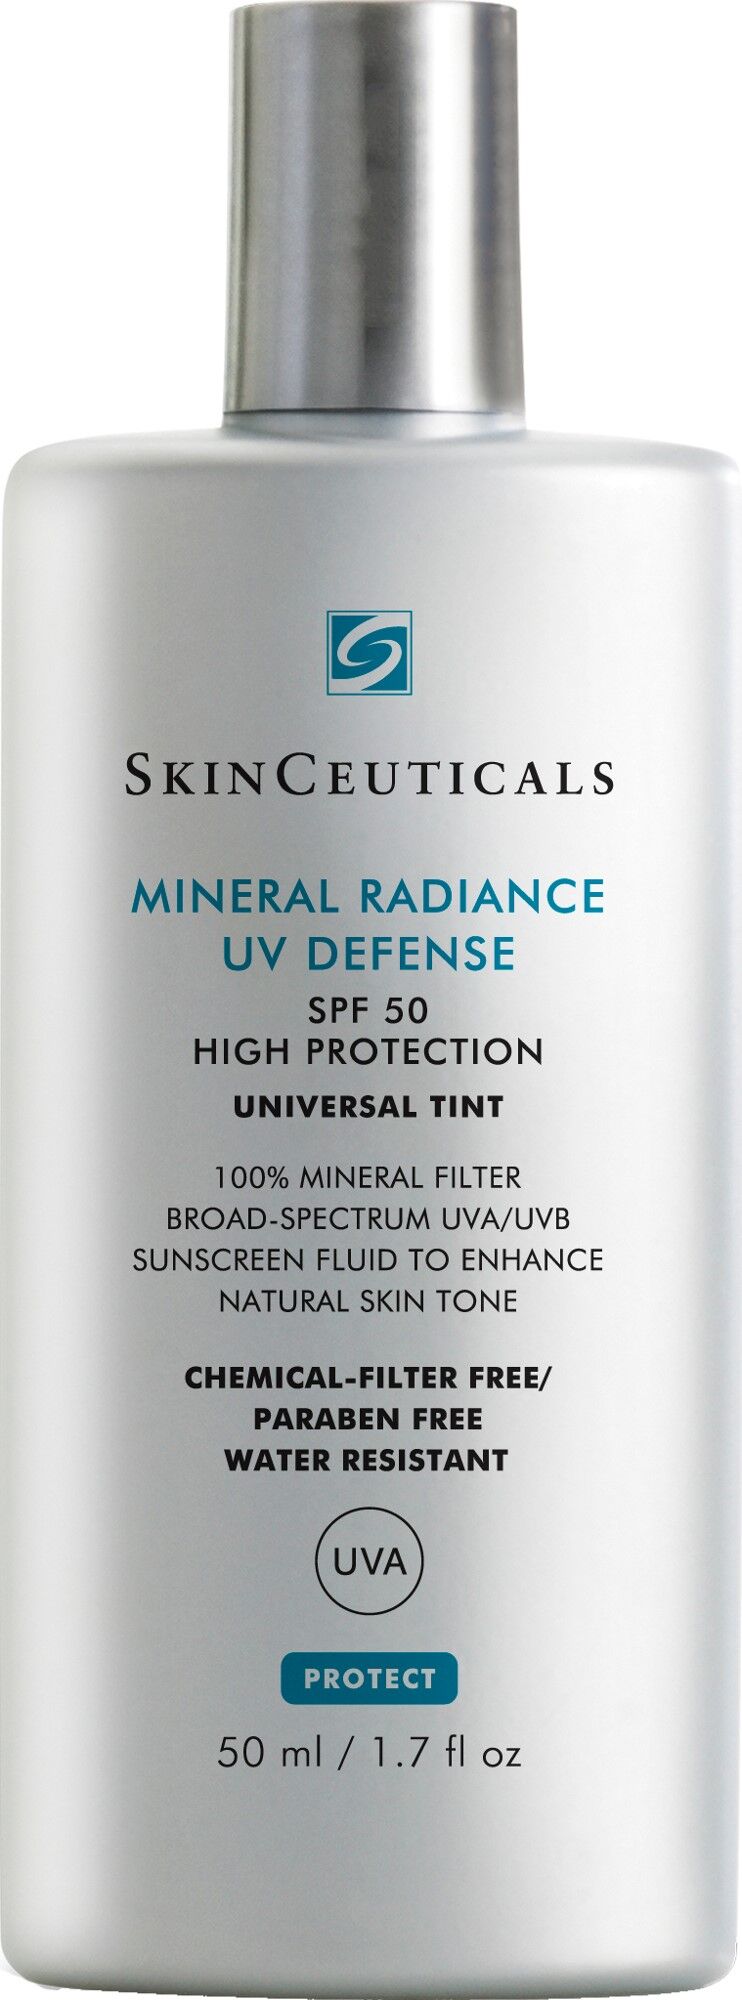 Skinceuticals Mineral Radiance UV Defense SPF50 Con Color 50mL Tinted SPF50